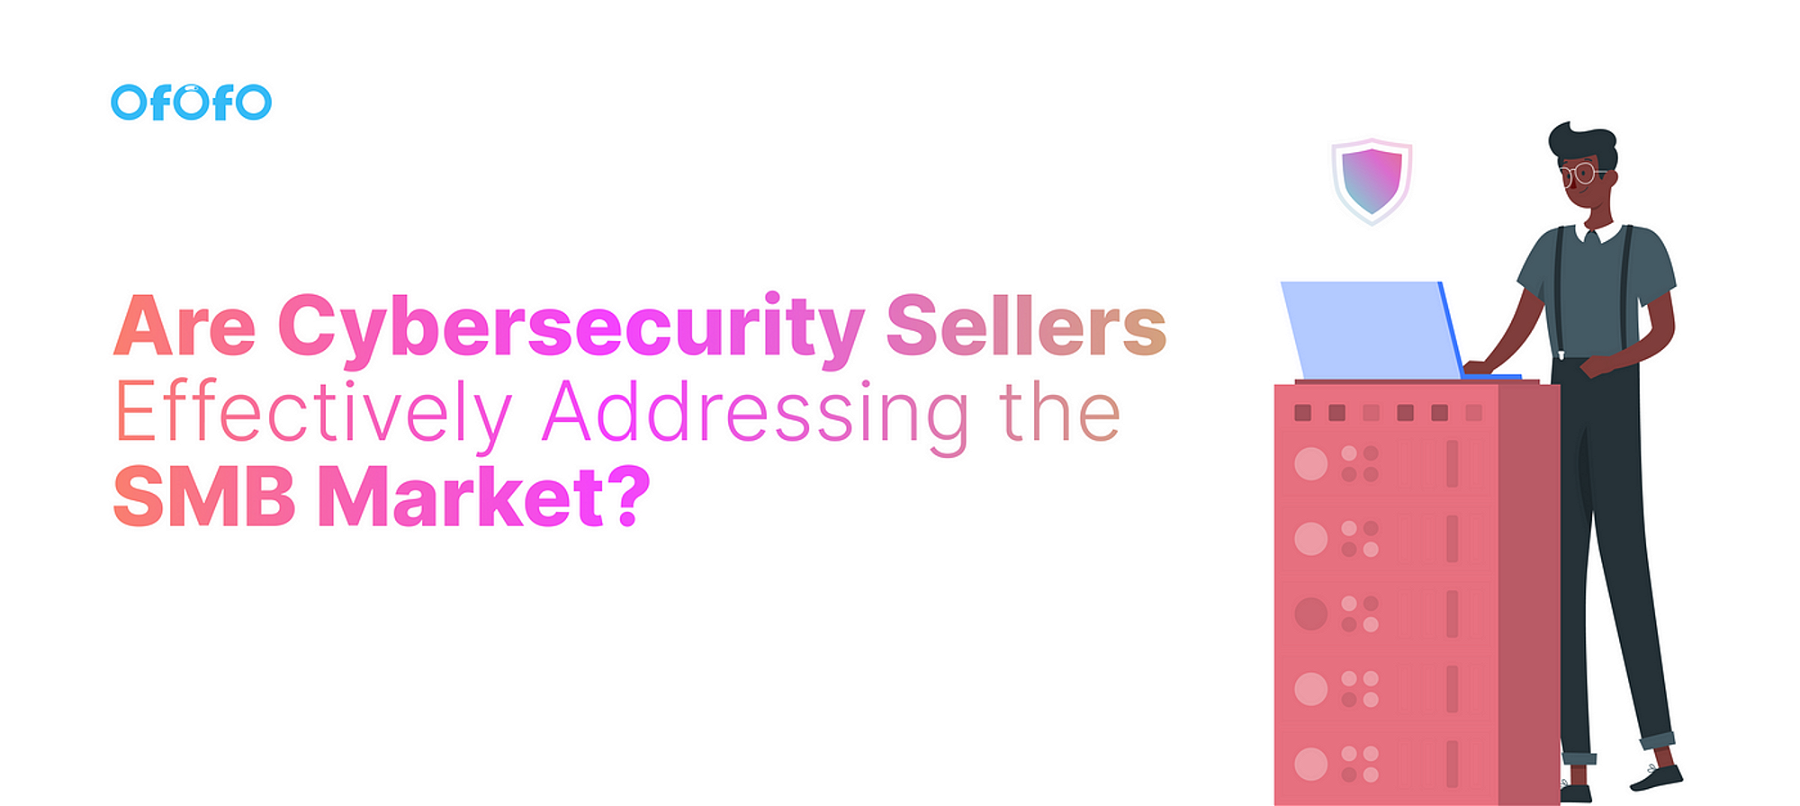 Are Cybersecurity Sellers Effectively Addressing the SMB Market?